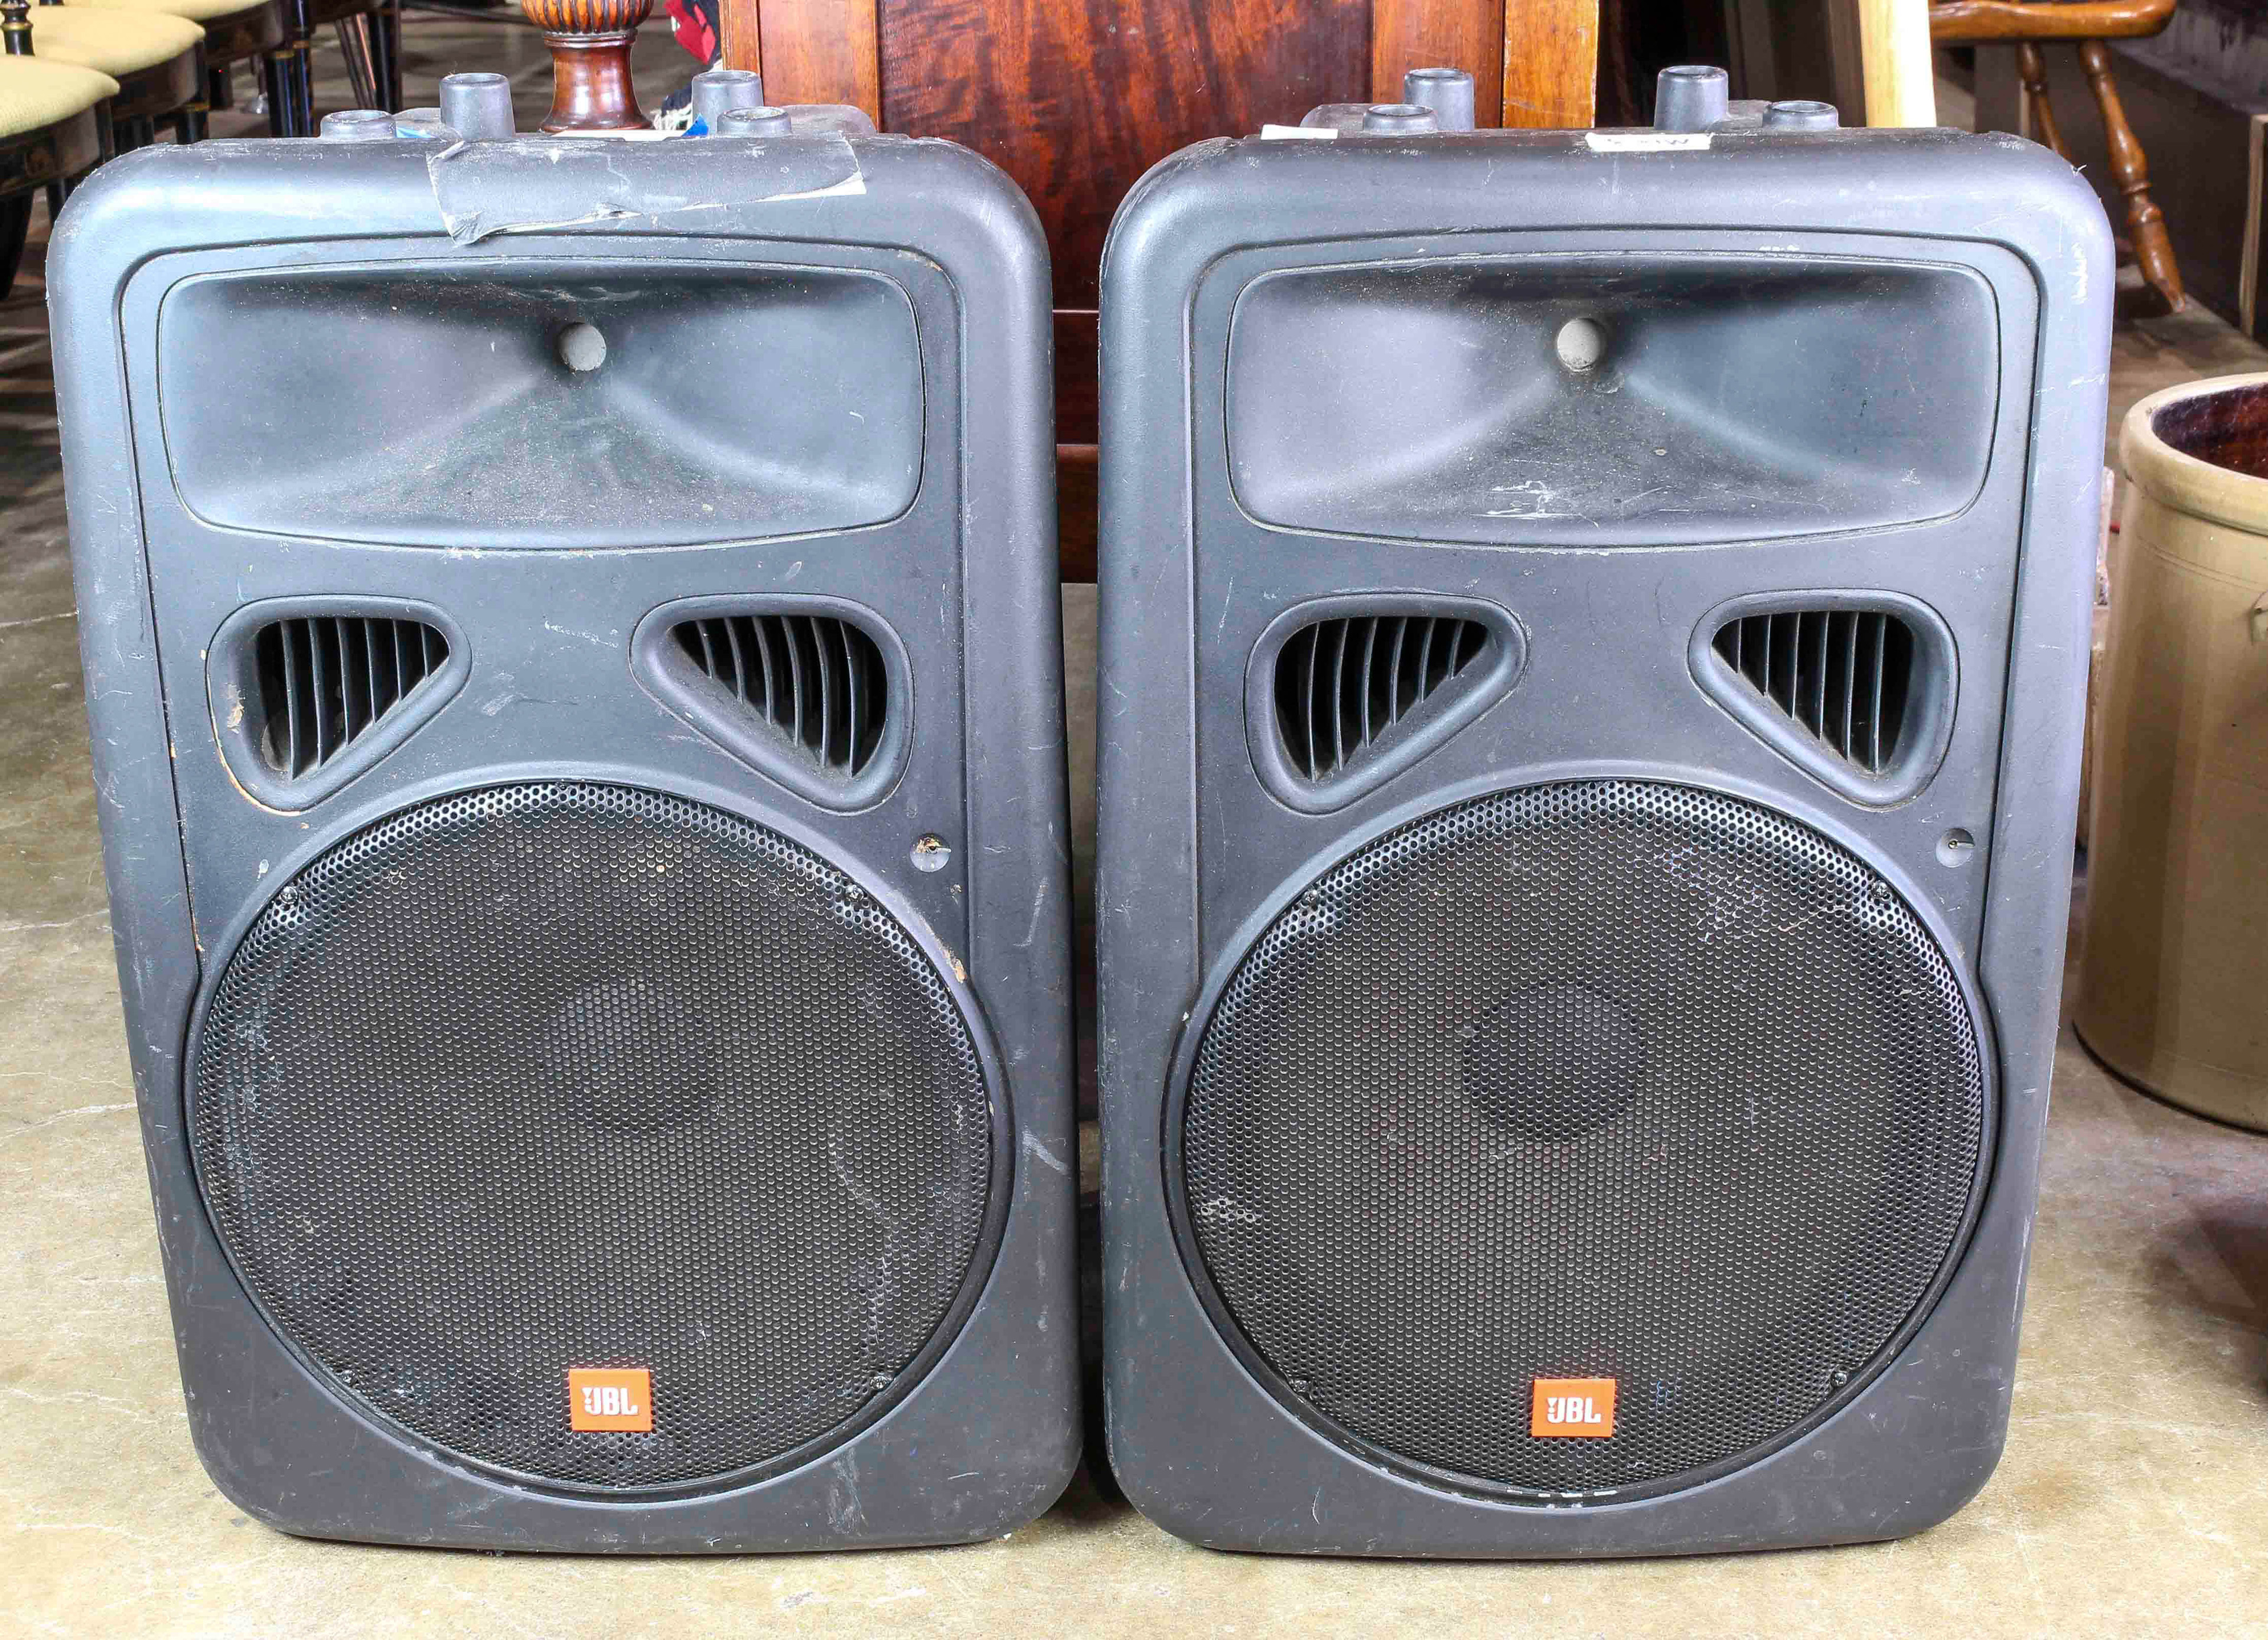  LOT OF 2 JBL SPEAKERS lot of 3a6285